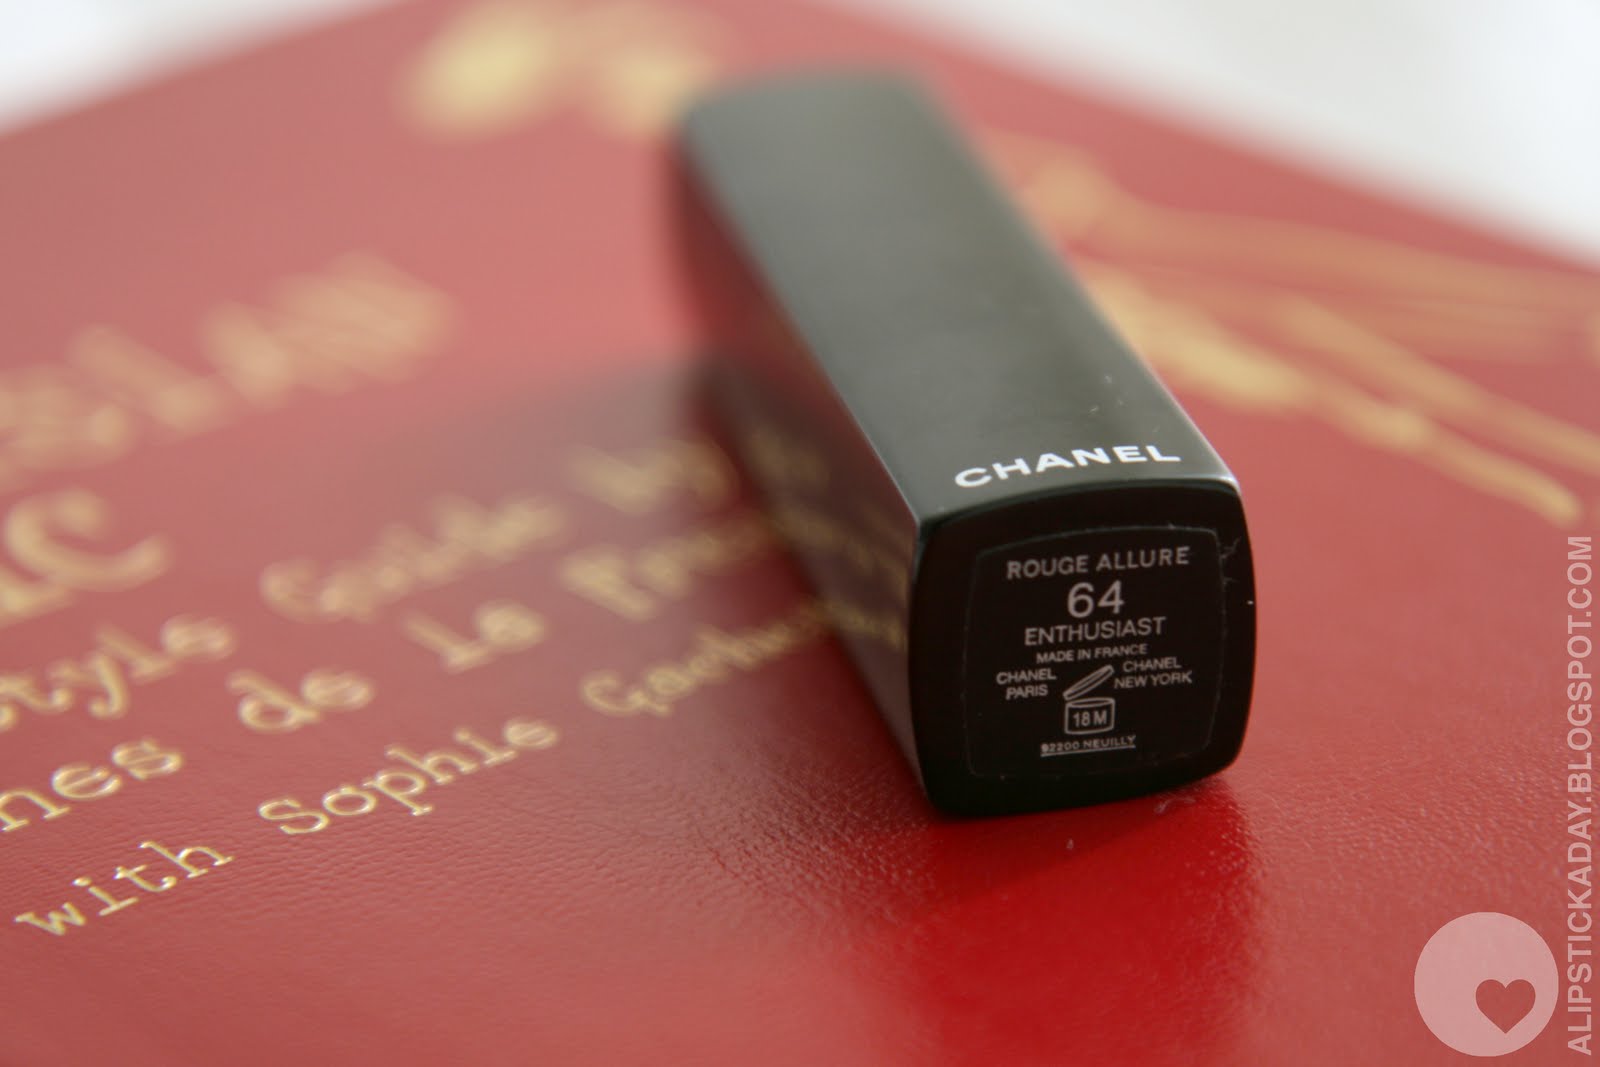 A LIPSTICK A DAY: Lipstick of the day #1 revisited: Chanel Rouge